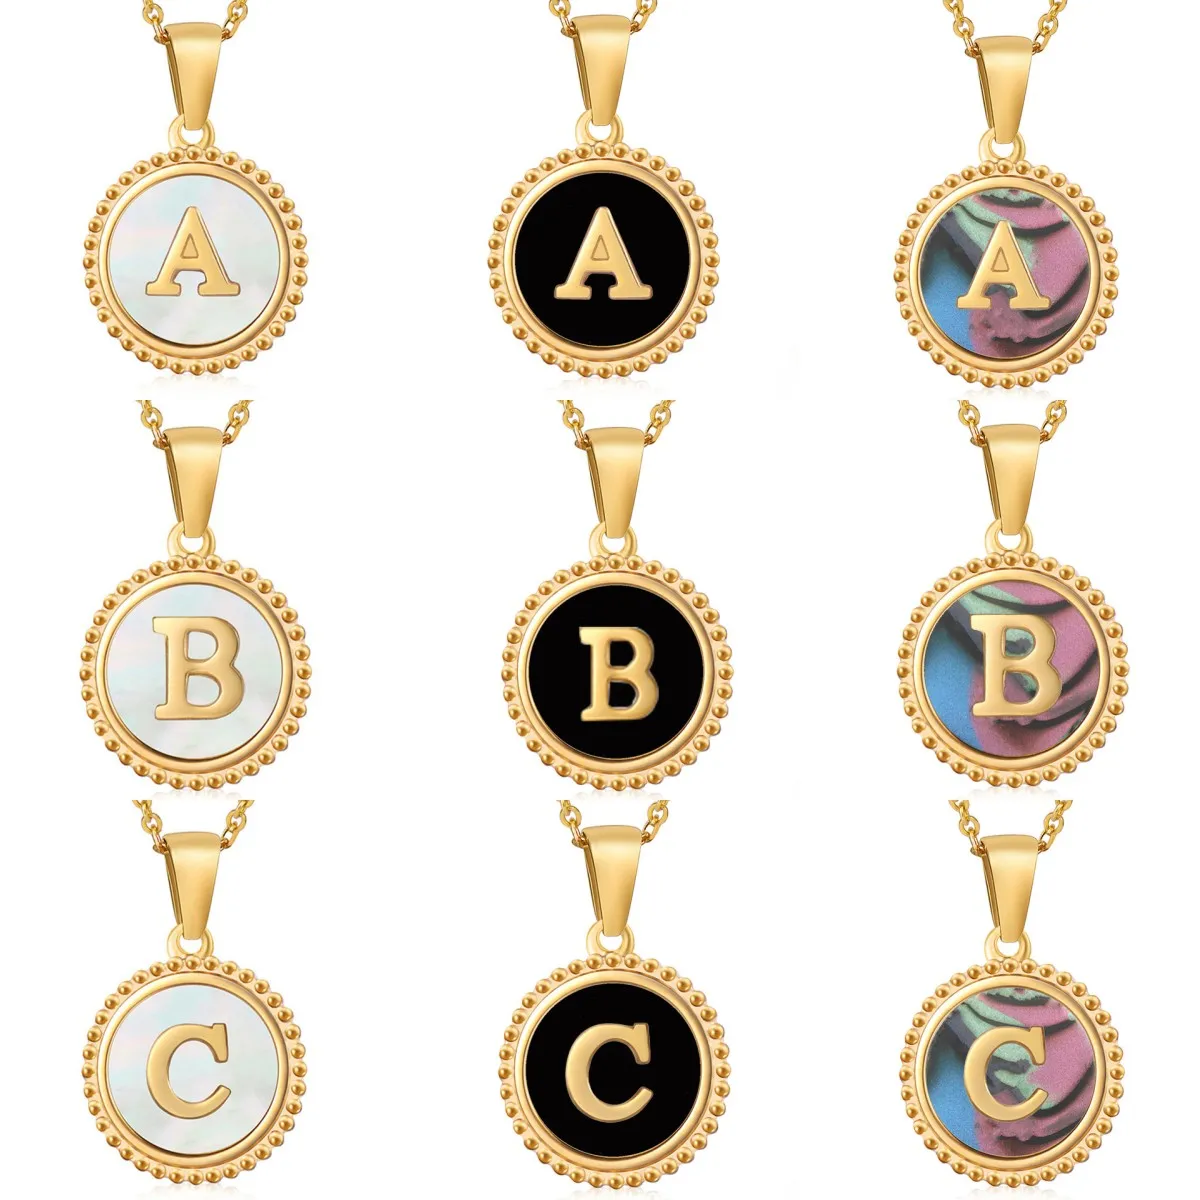 5pcs/lot Personalized Round Stainless Steel Necklace for Women Custom Name Initials Gold Color Pendant Choker Necklace Wholesale